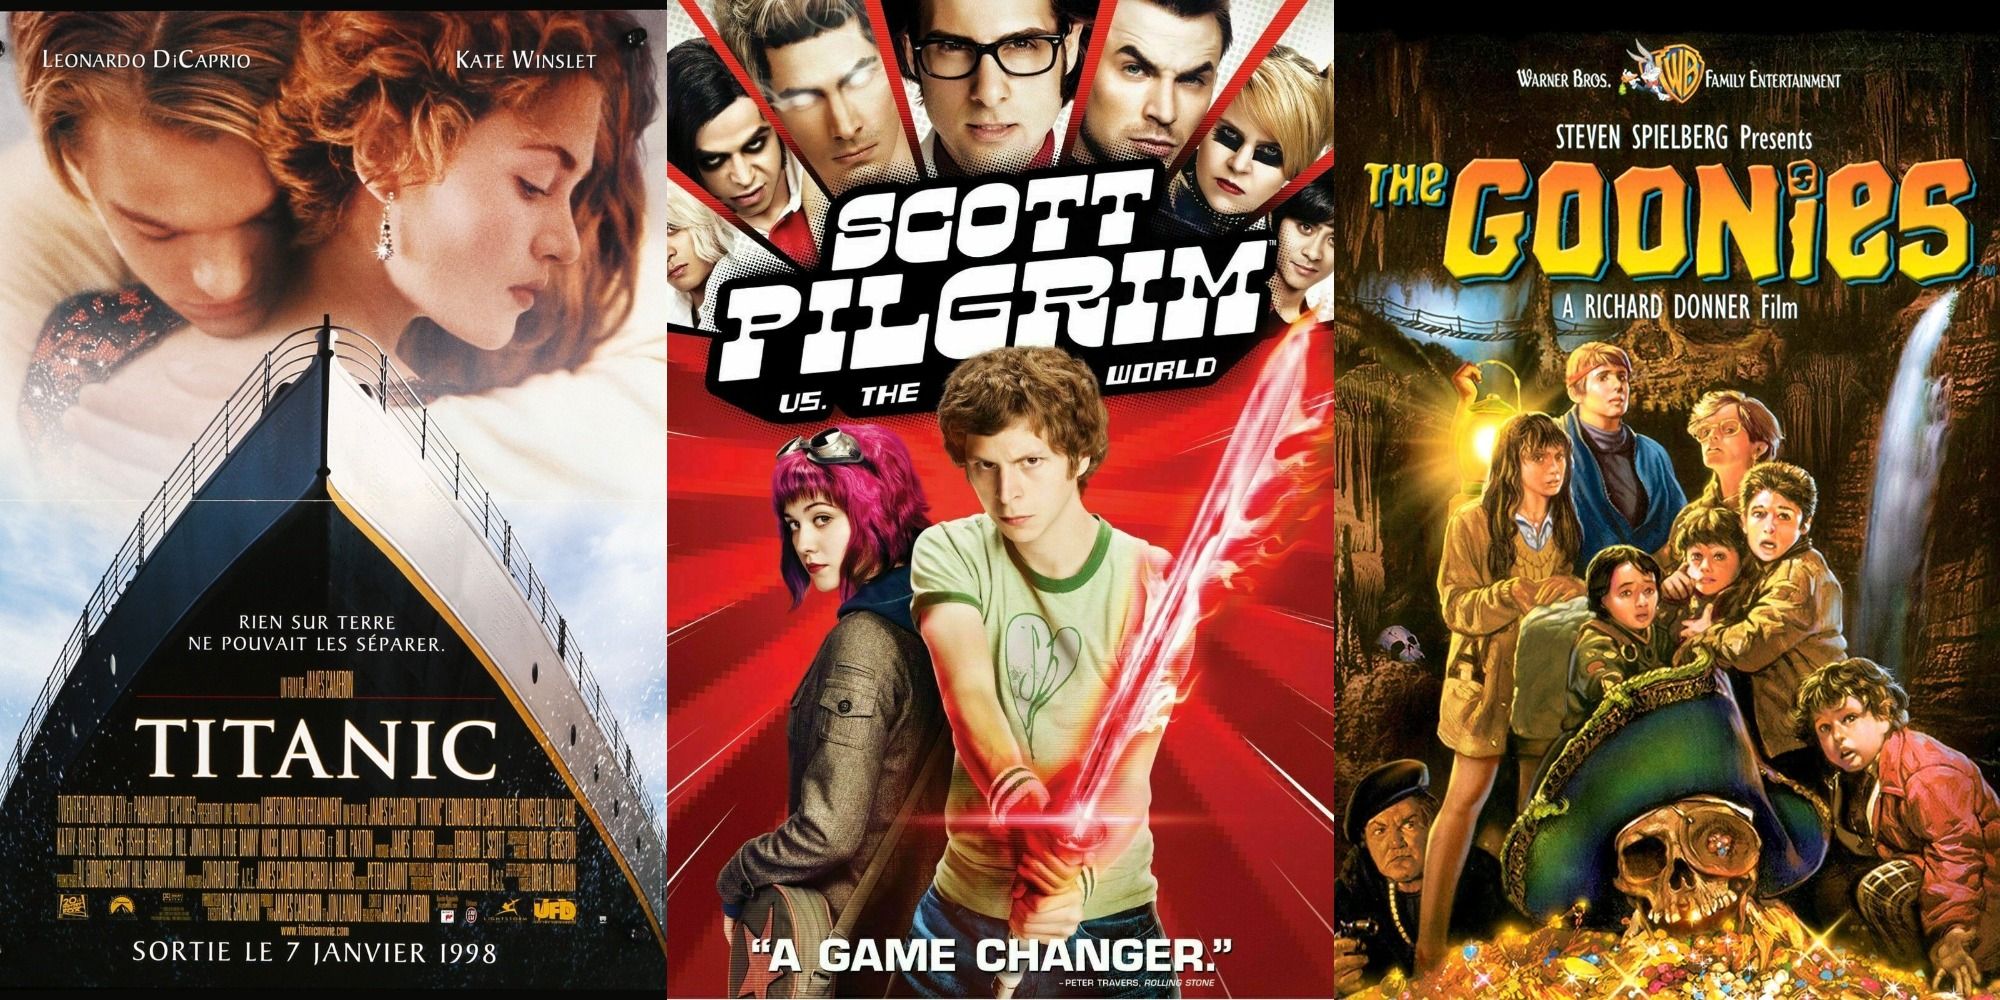 A split image of the Titanic poster, the Scott Pilgrim poster, and The Goonies poster